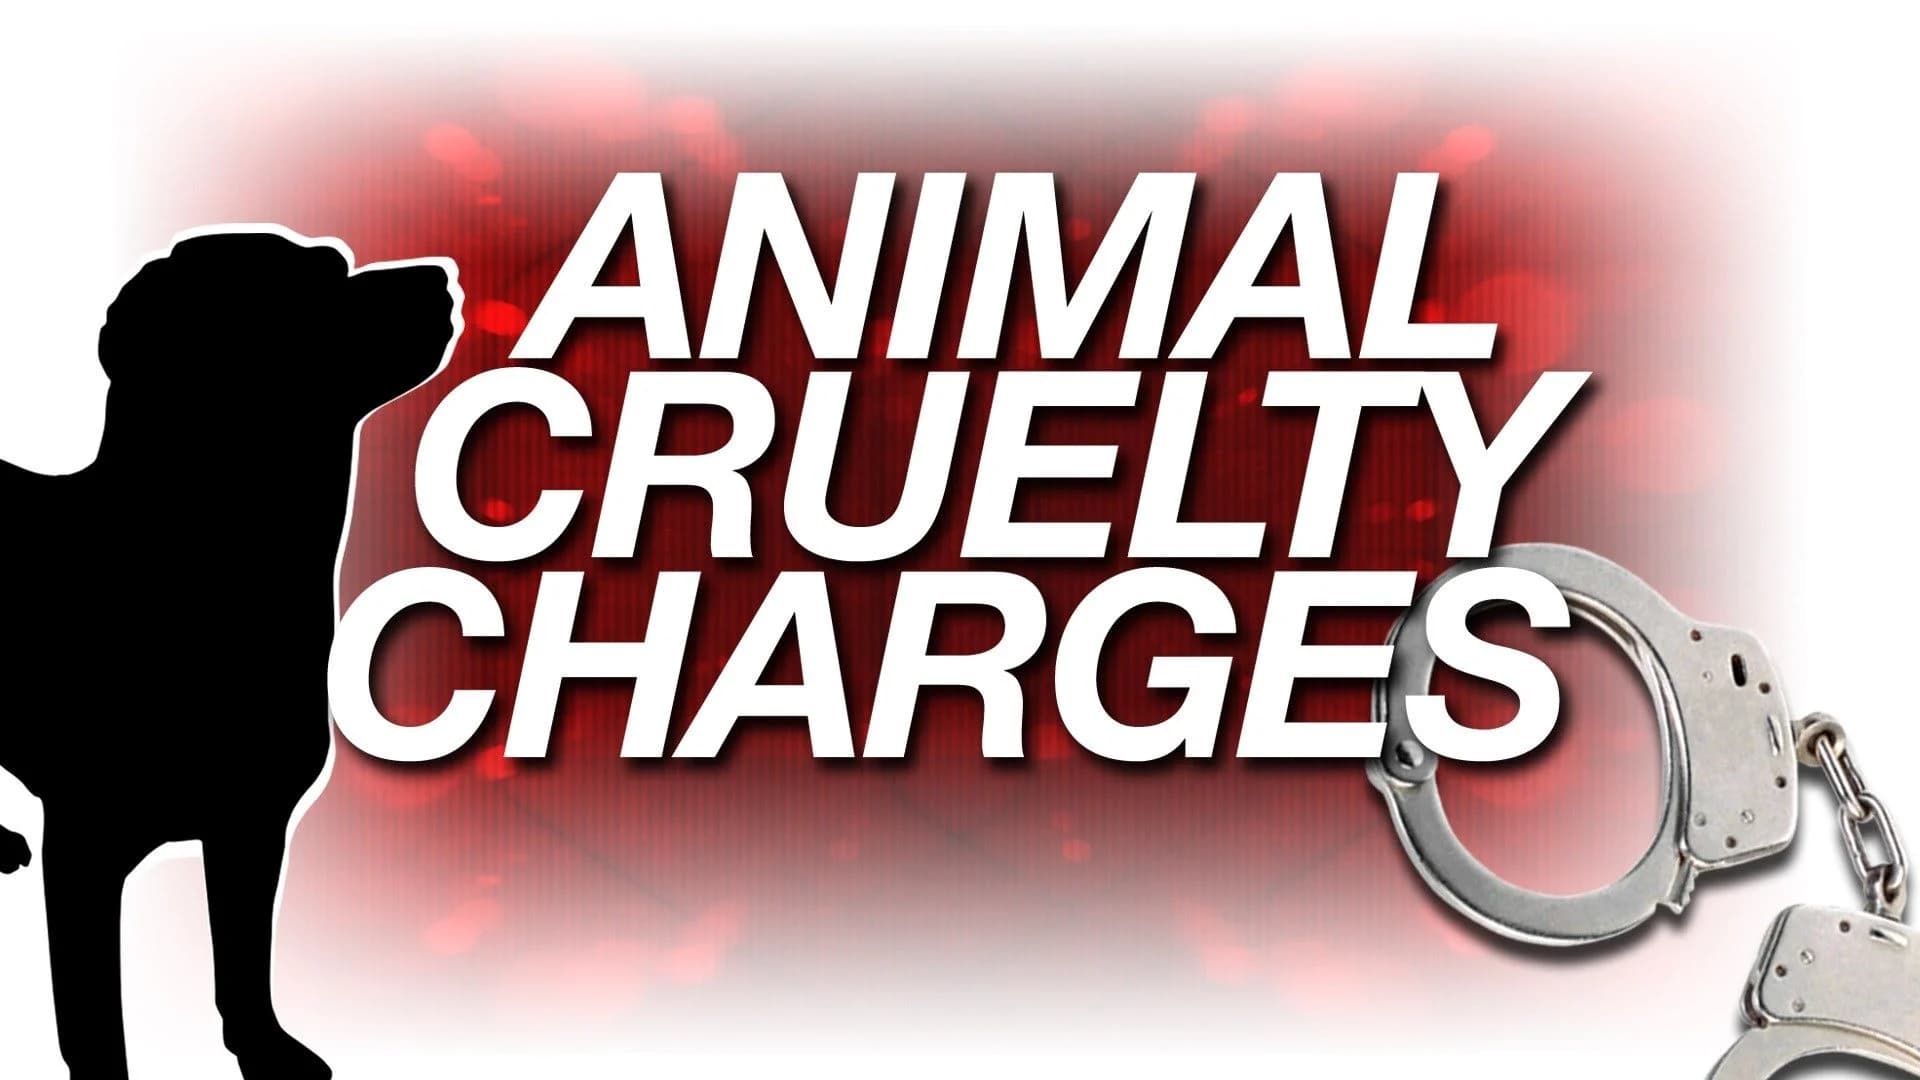 Woman charged with animal cruelty after dog found starving